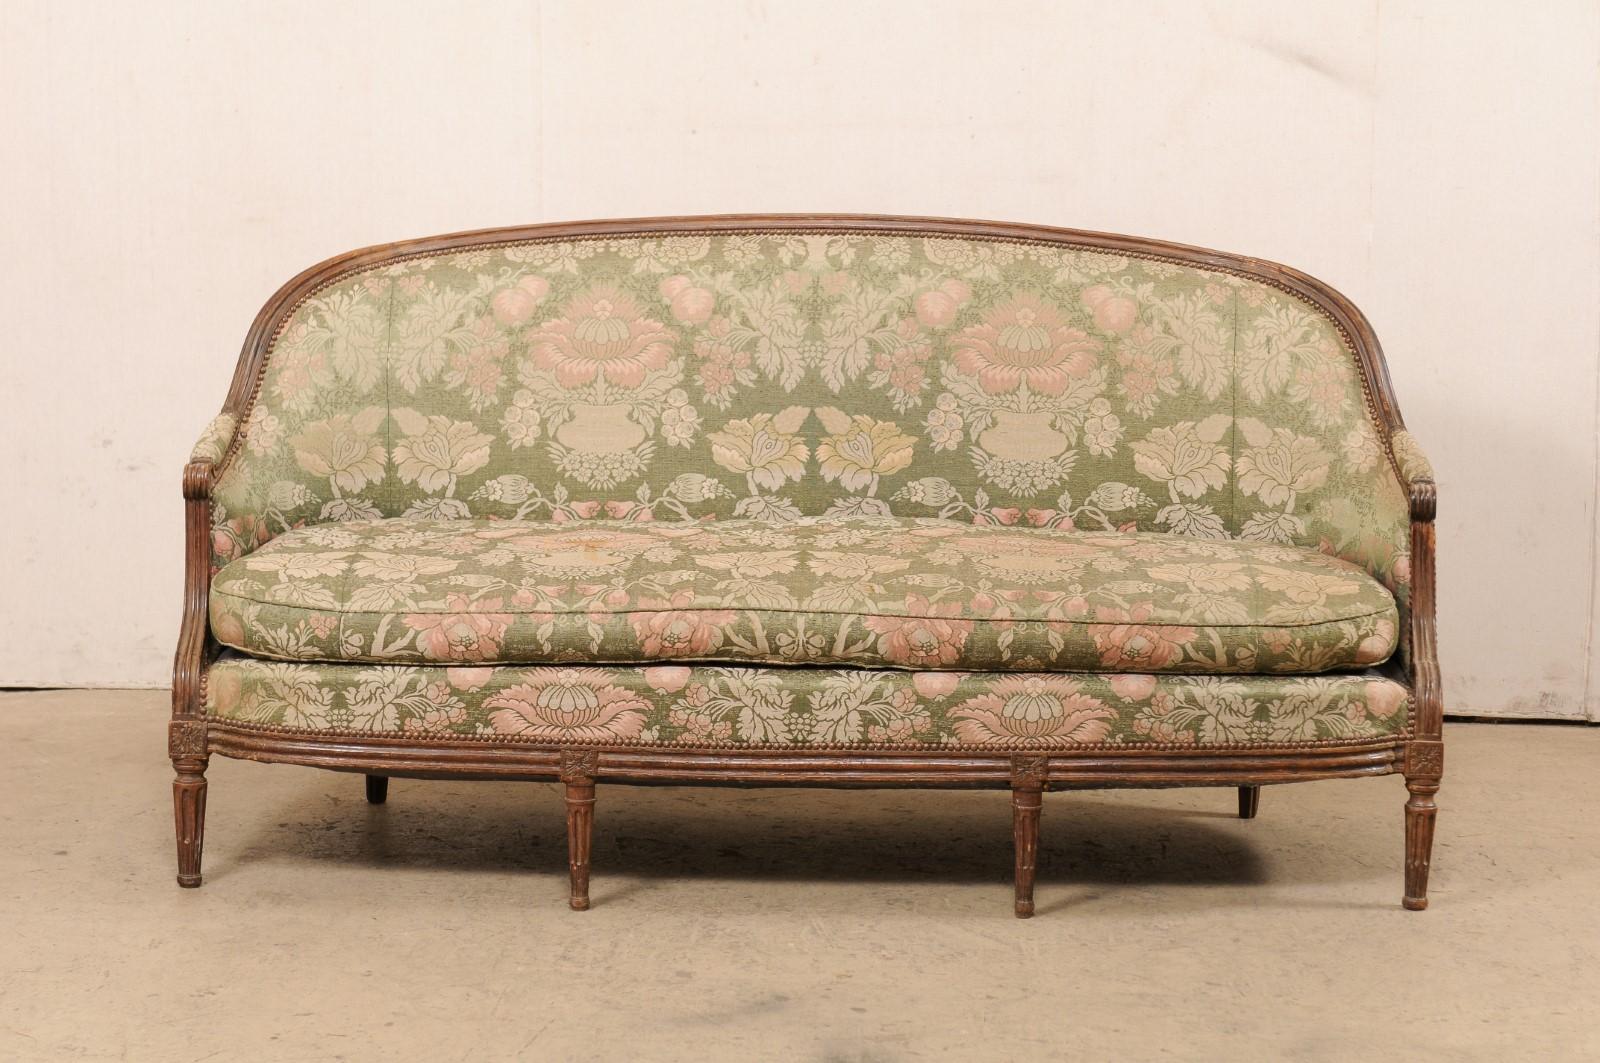 Swedish Gustavian Carved-Wood and Upholstered Tub Sofa, Early 19th Century For Sale 7